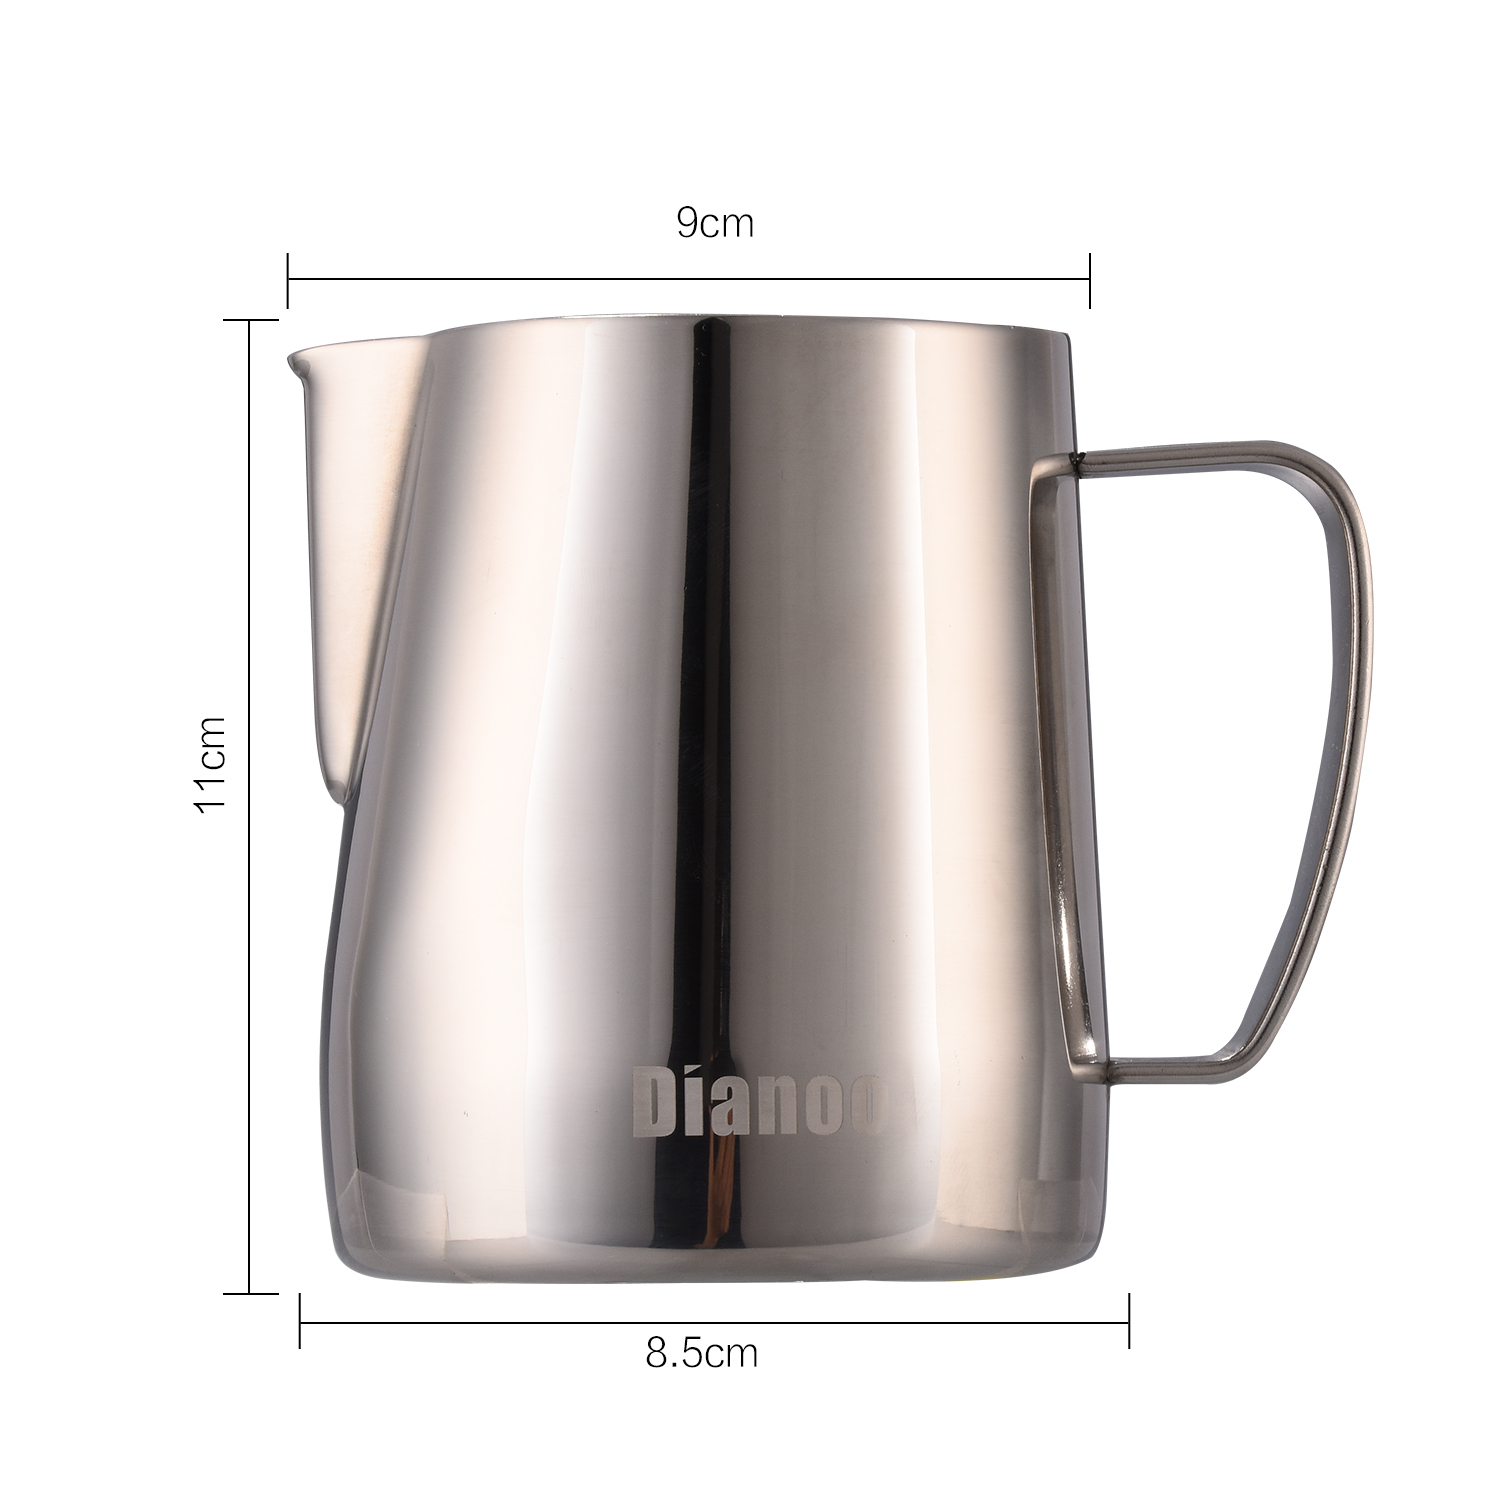 Dianoo Stainless Steel Milk Frothing Pitcher Creamer Frothing Pitcher Latte Art Cup For Espresso Cappuccino Coffee